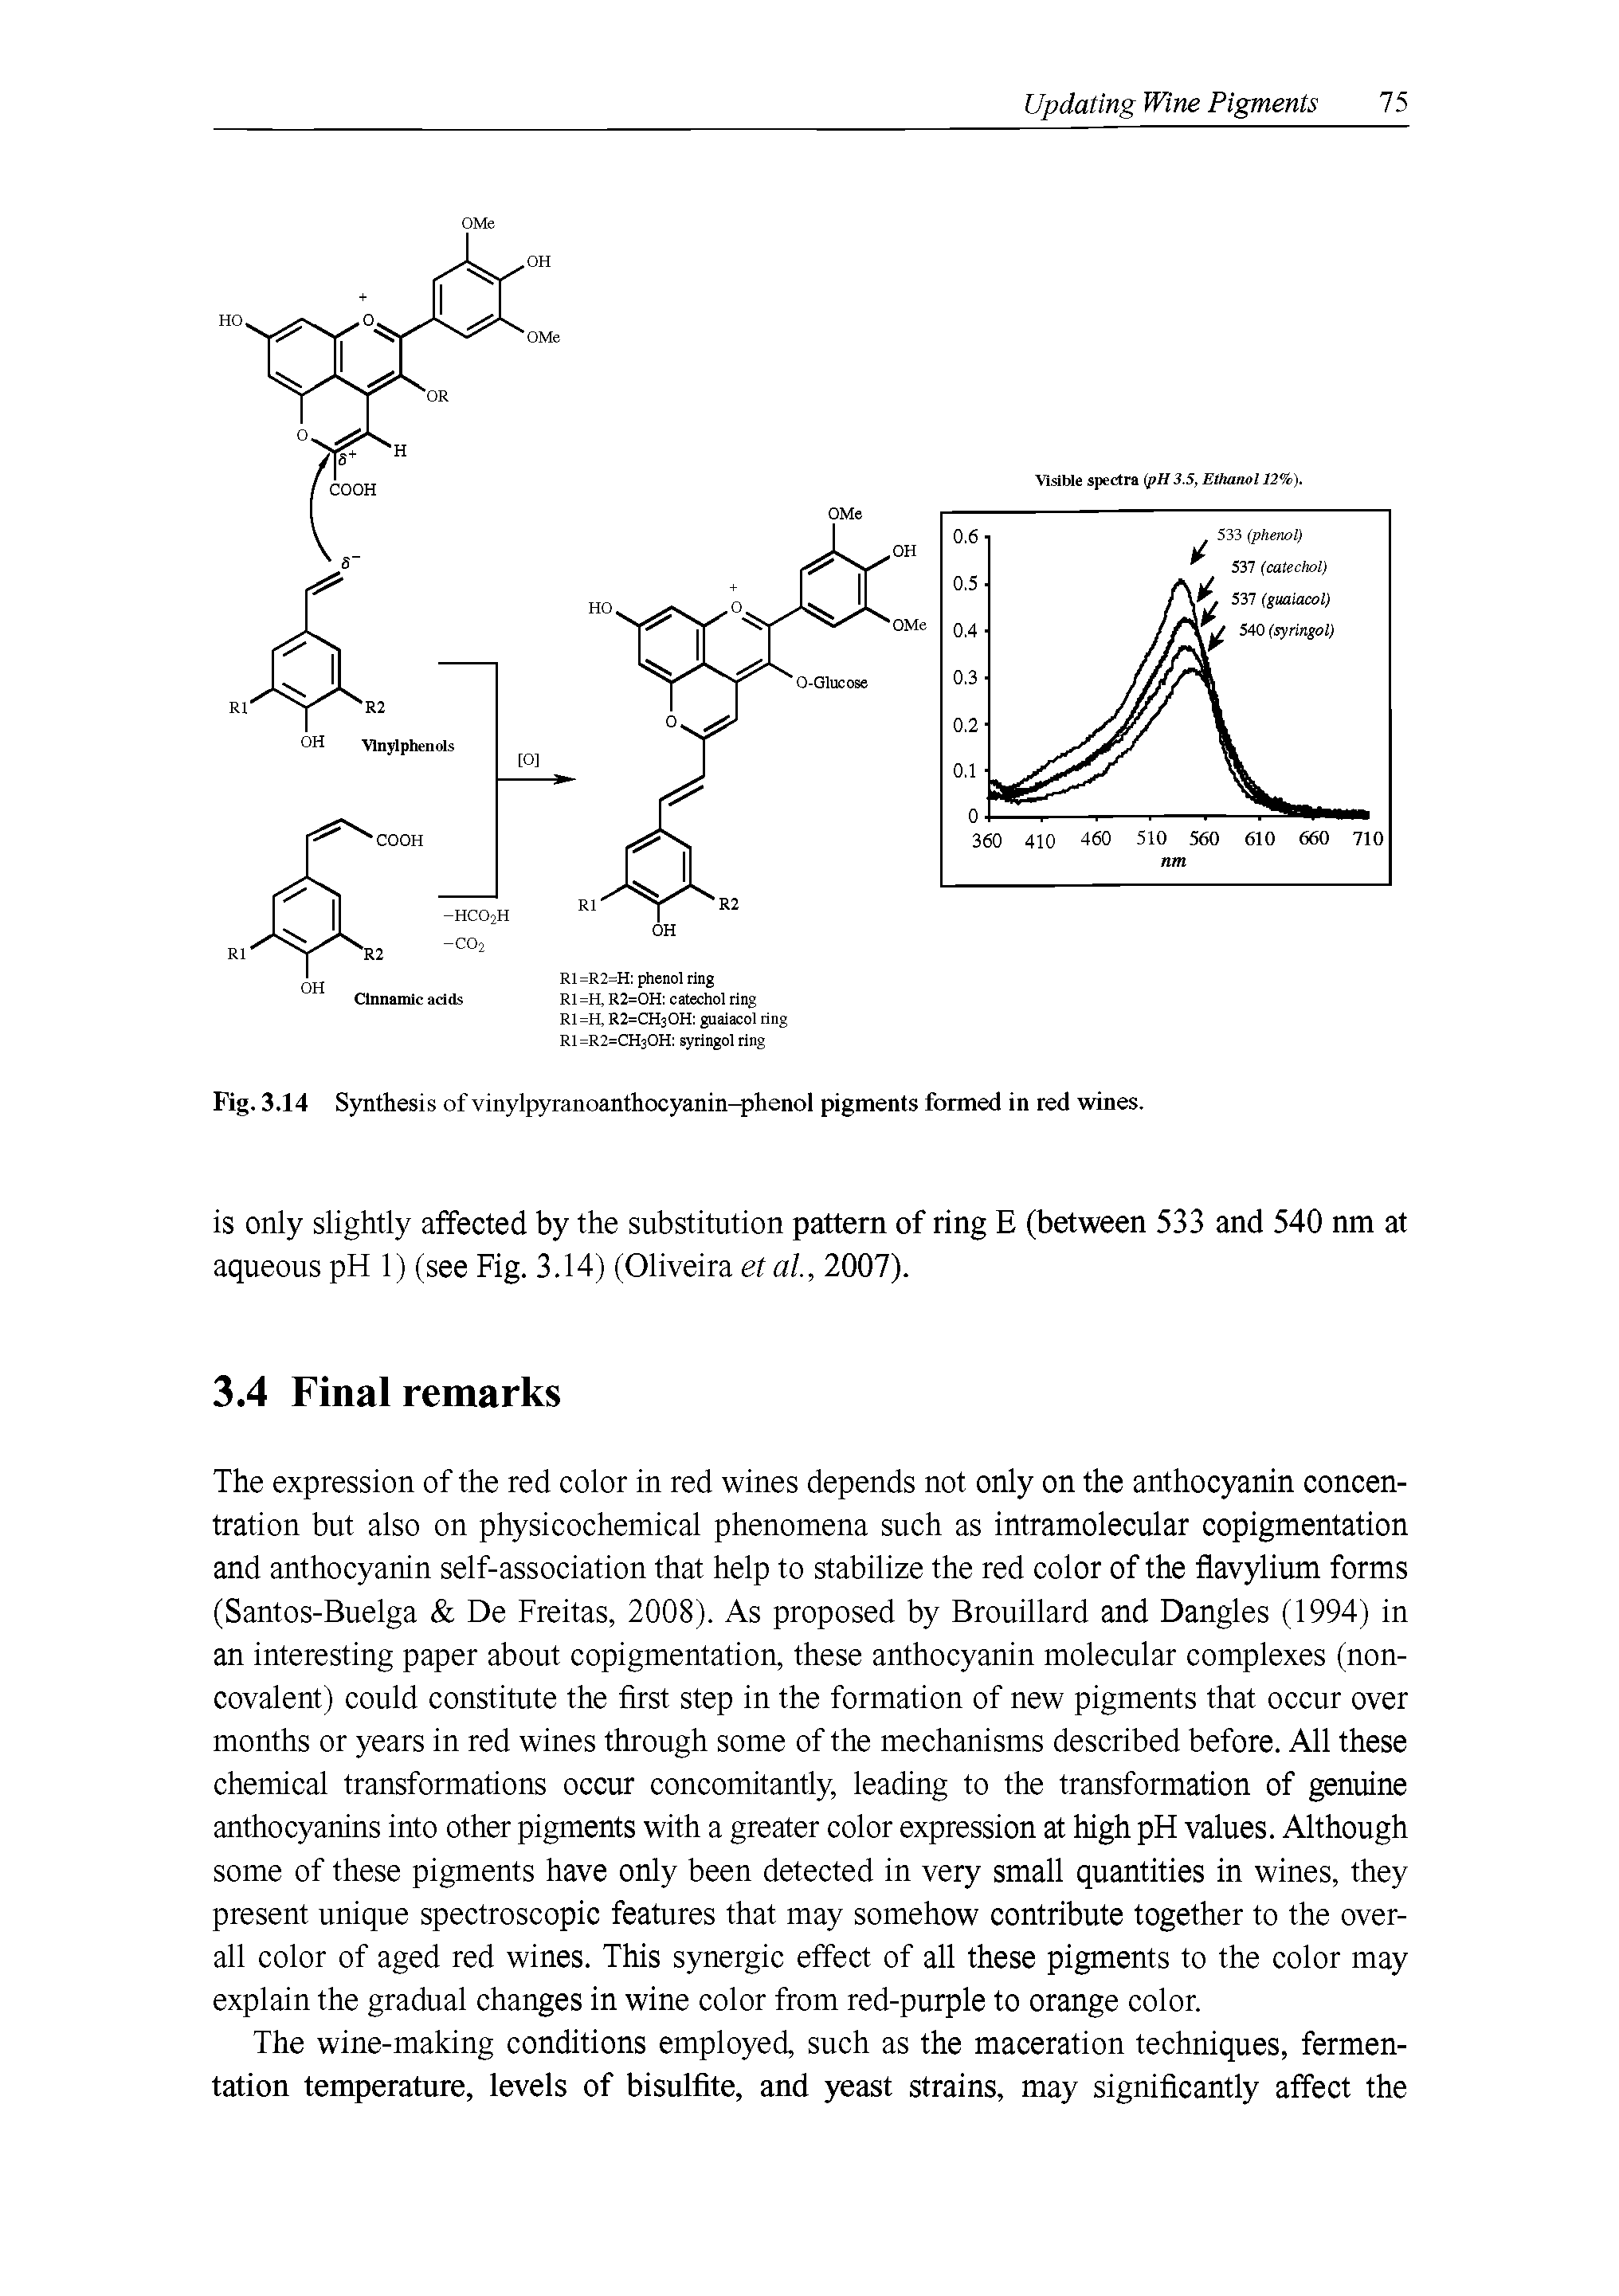 Fig. 3.14 Synthesis of vinylpyranoanthocyanin-phenol pigments formed in red wines.